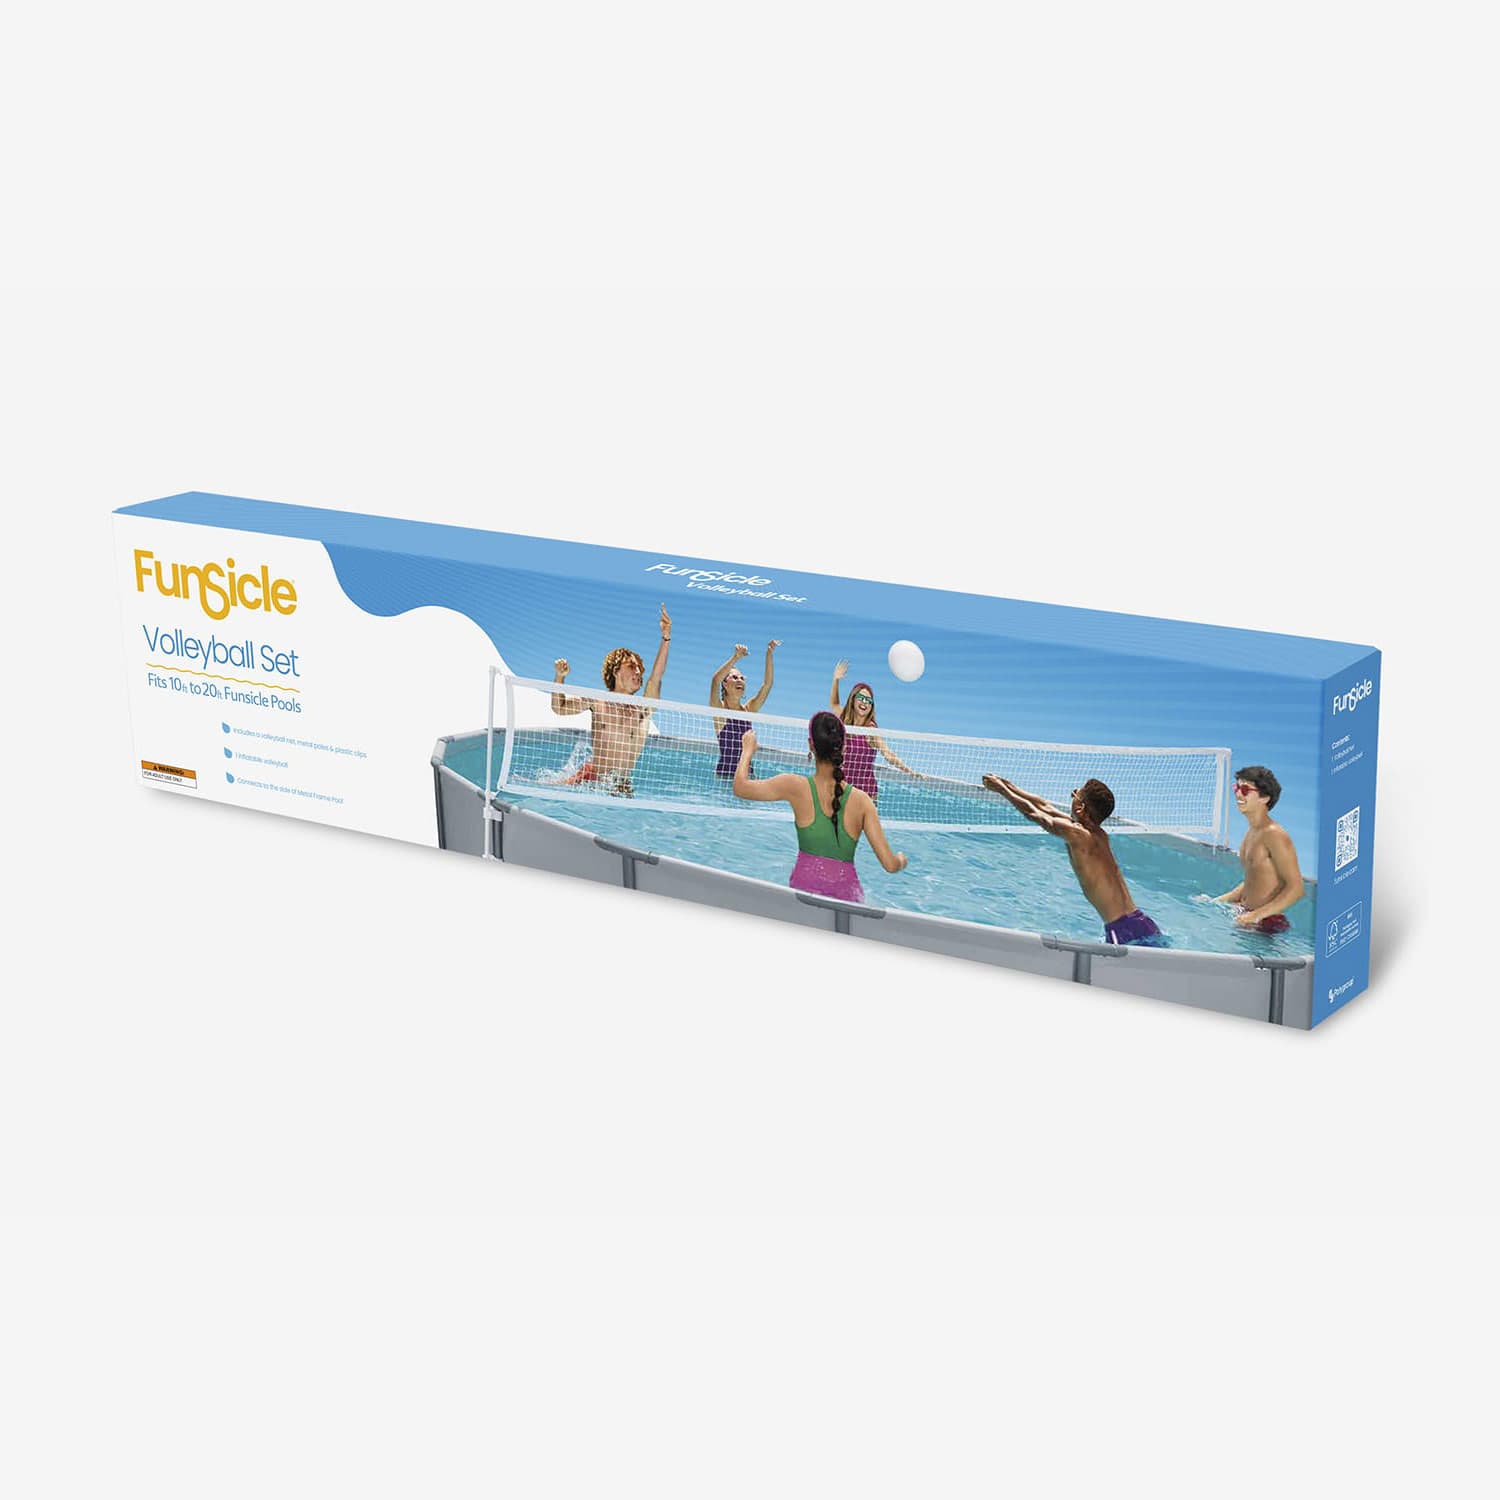 Funsicle Volleyball Set packaging